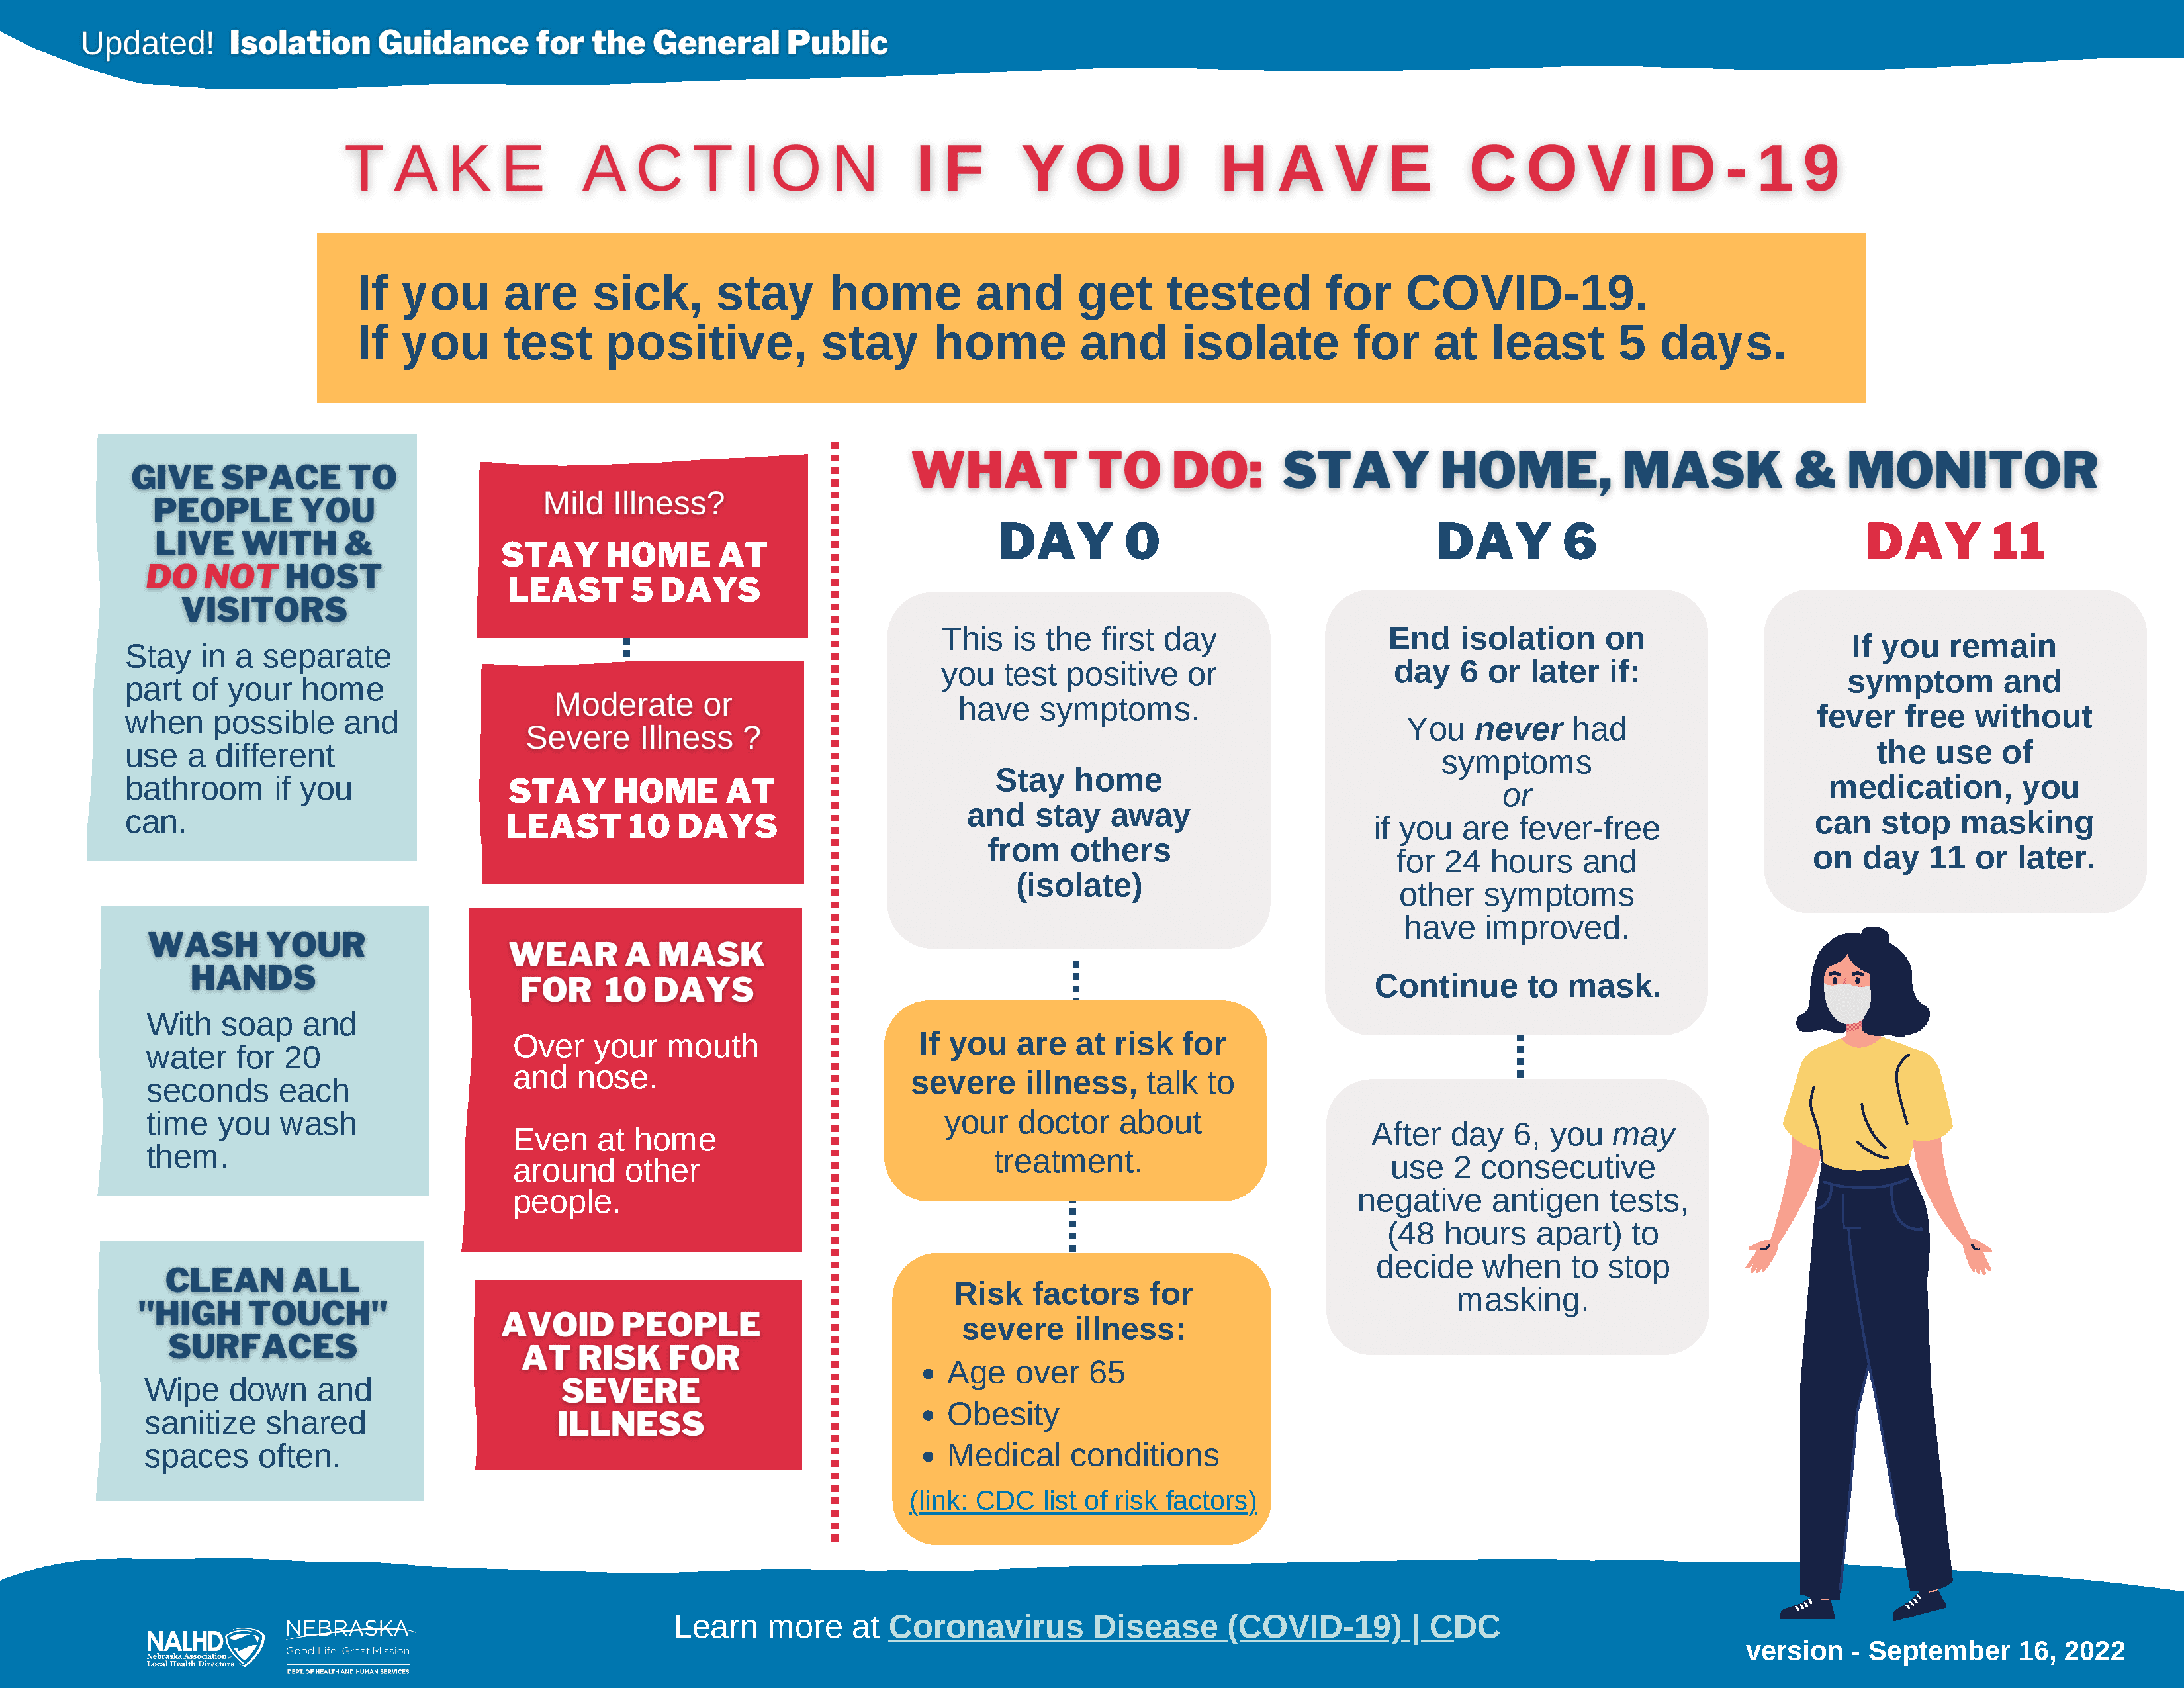 What to do if you test positive for COVID-19